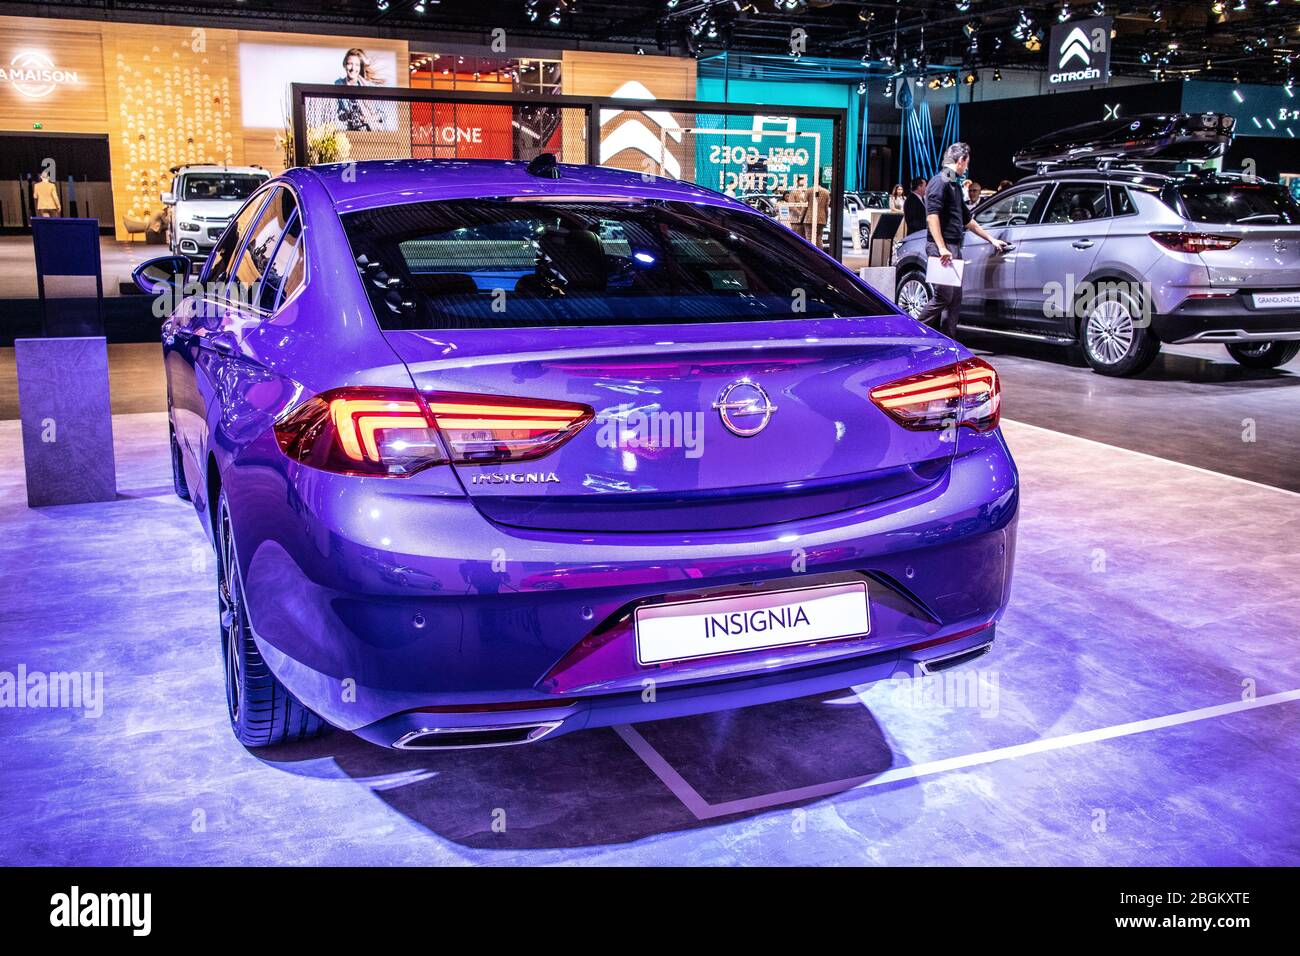 Brussels, Belgium, Jan 2020: OPEL Insignia at Brussels Motor Show, 2nd gen facelift, B / MkII, large family car engineered and produced by Opel Stock Photo